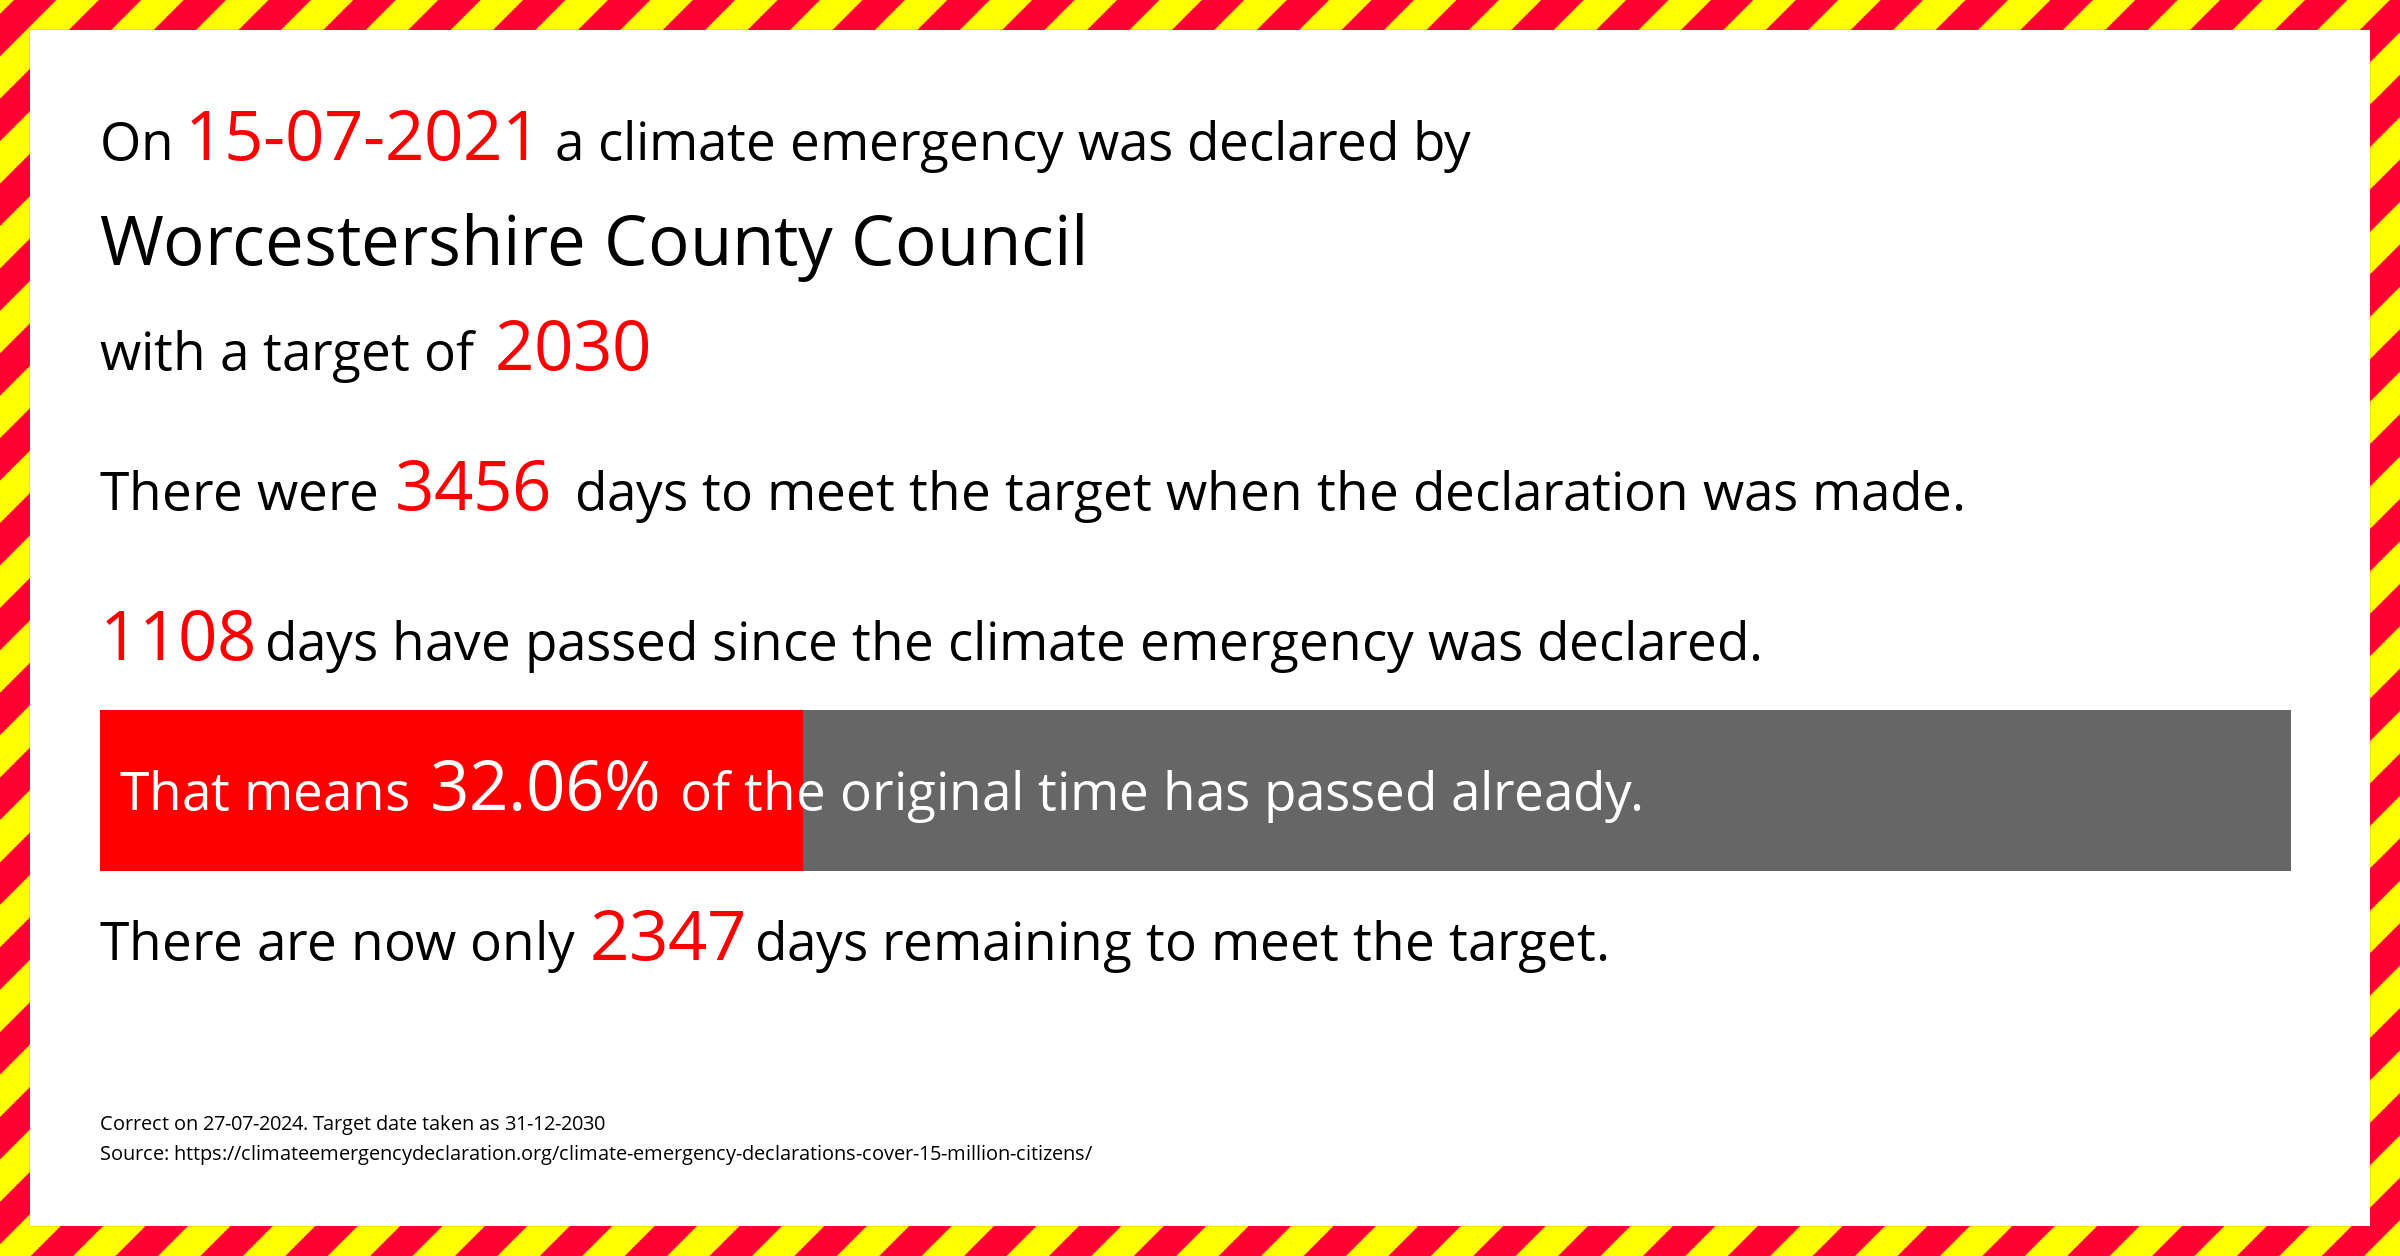 Worcestershire County Council  declared a Climate emergency on Thursday 15th July 2021, with a target of 2030.